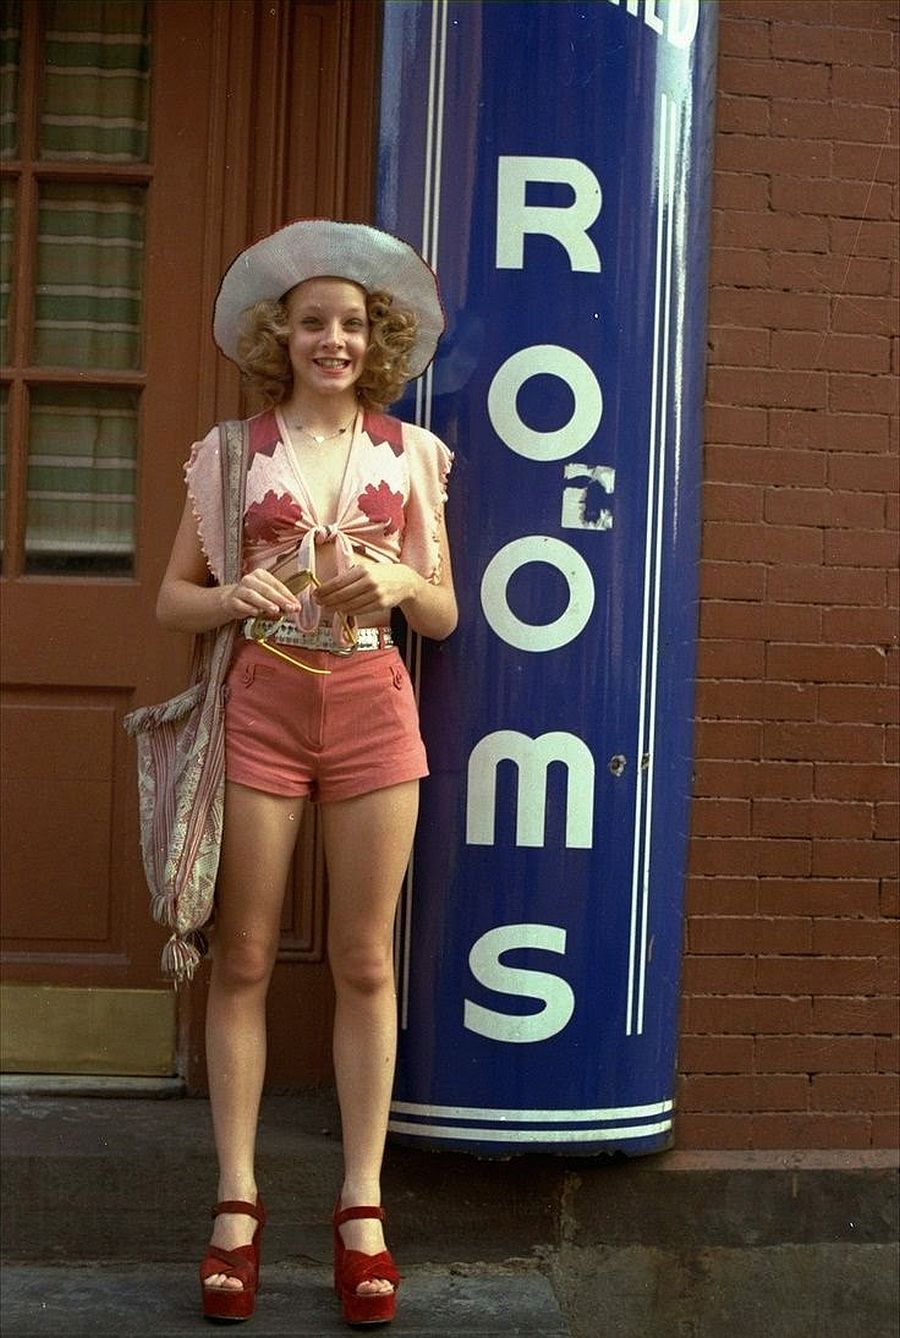 behind-the-scenes-jodie-foster-on-the-set-of-taxi-driver-1976-06